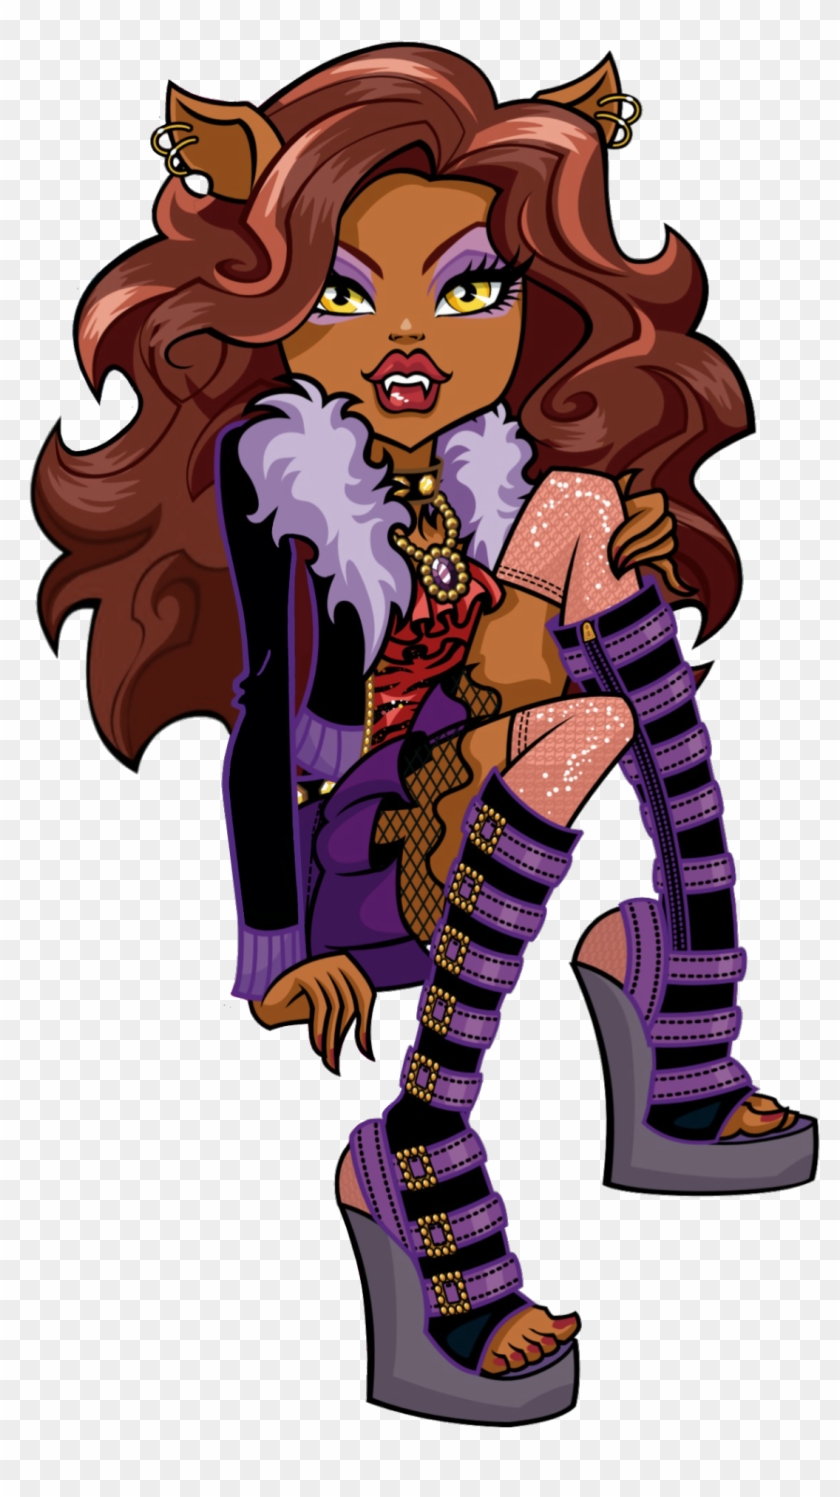 Confident And Fierce, She Is Considered The School's - Clawdeen Wolf Monster High Artwork #1126282